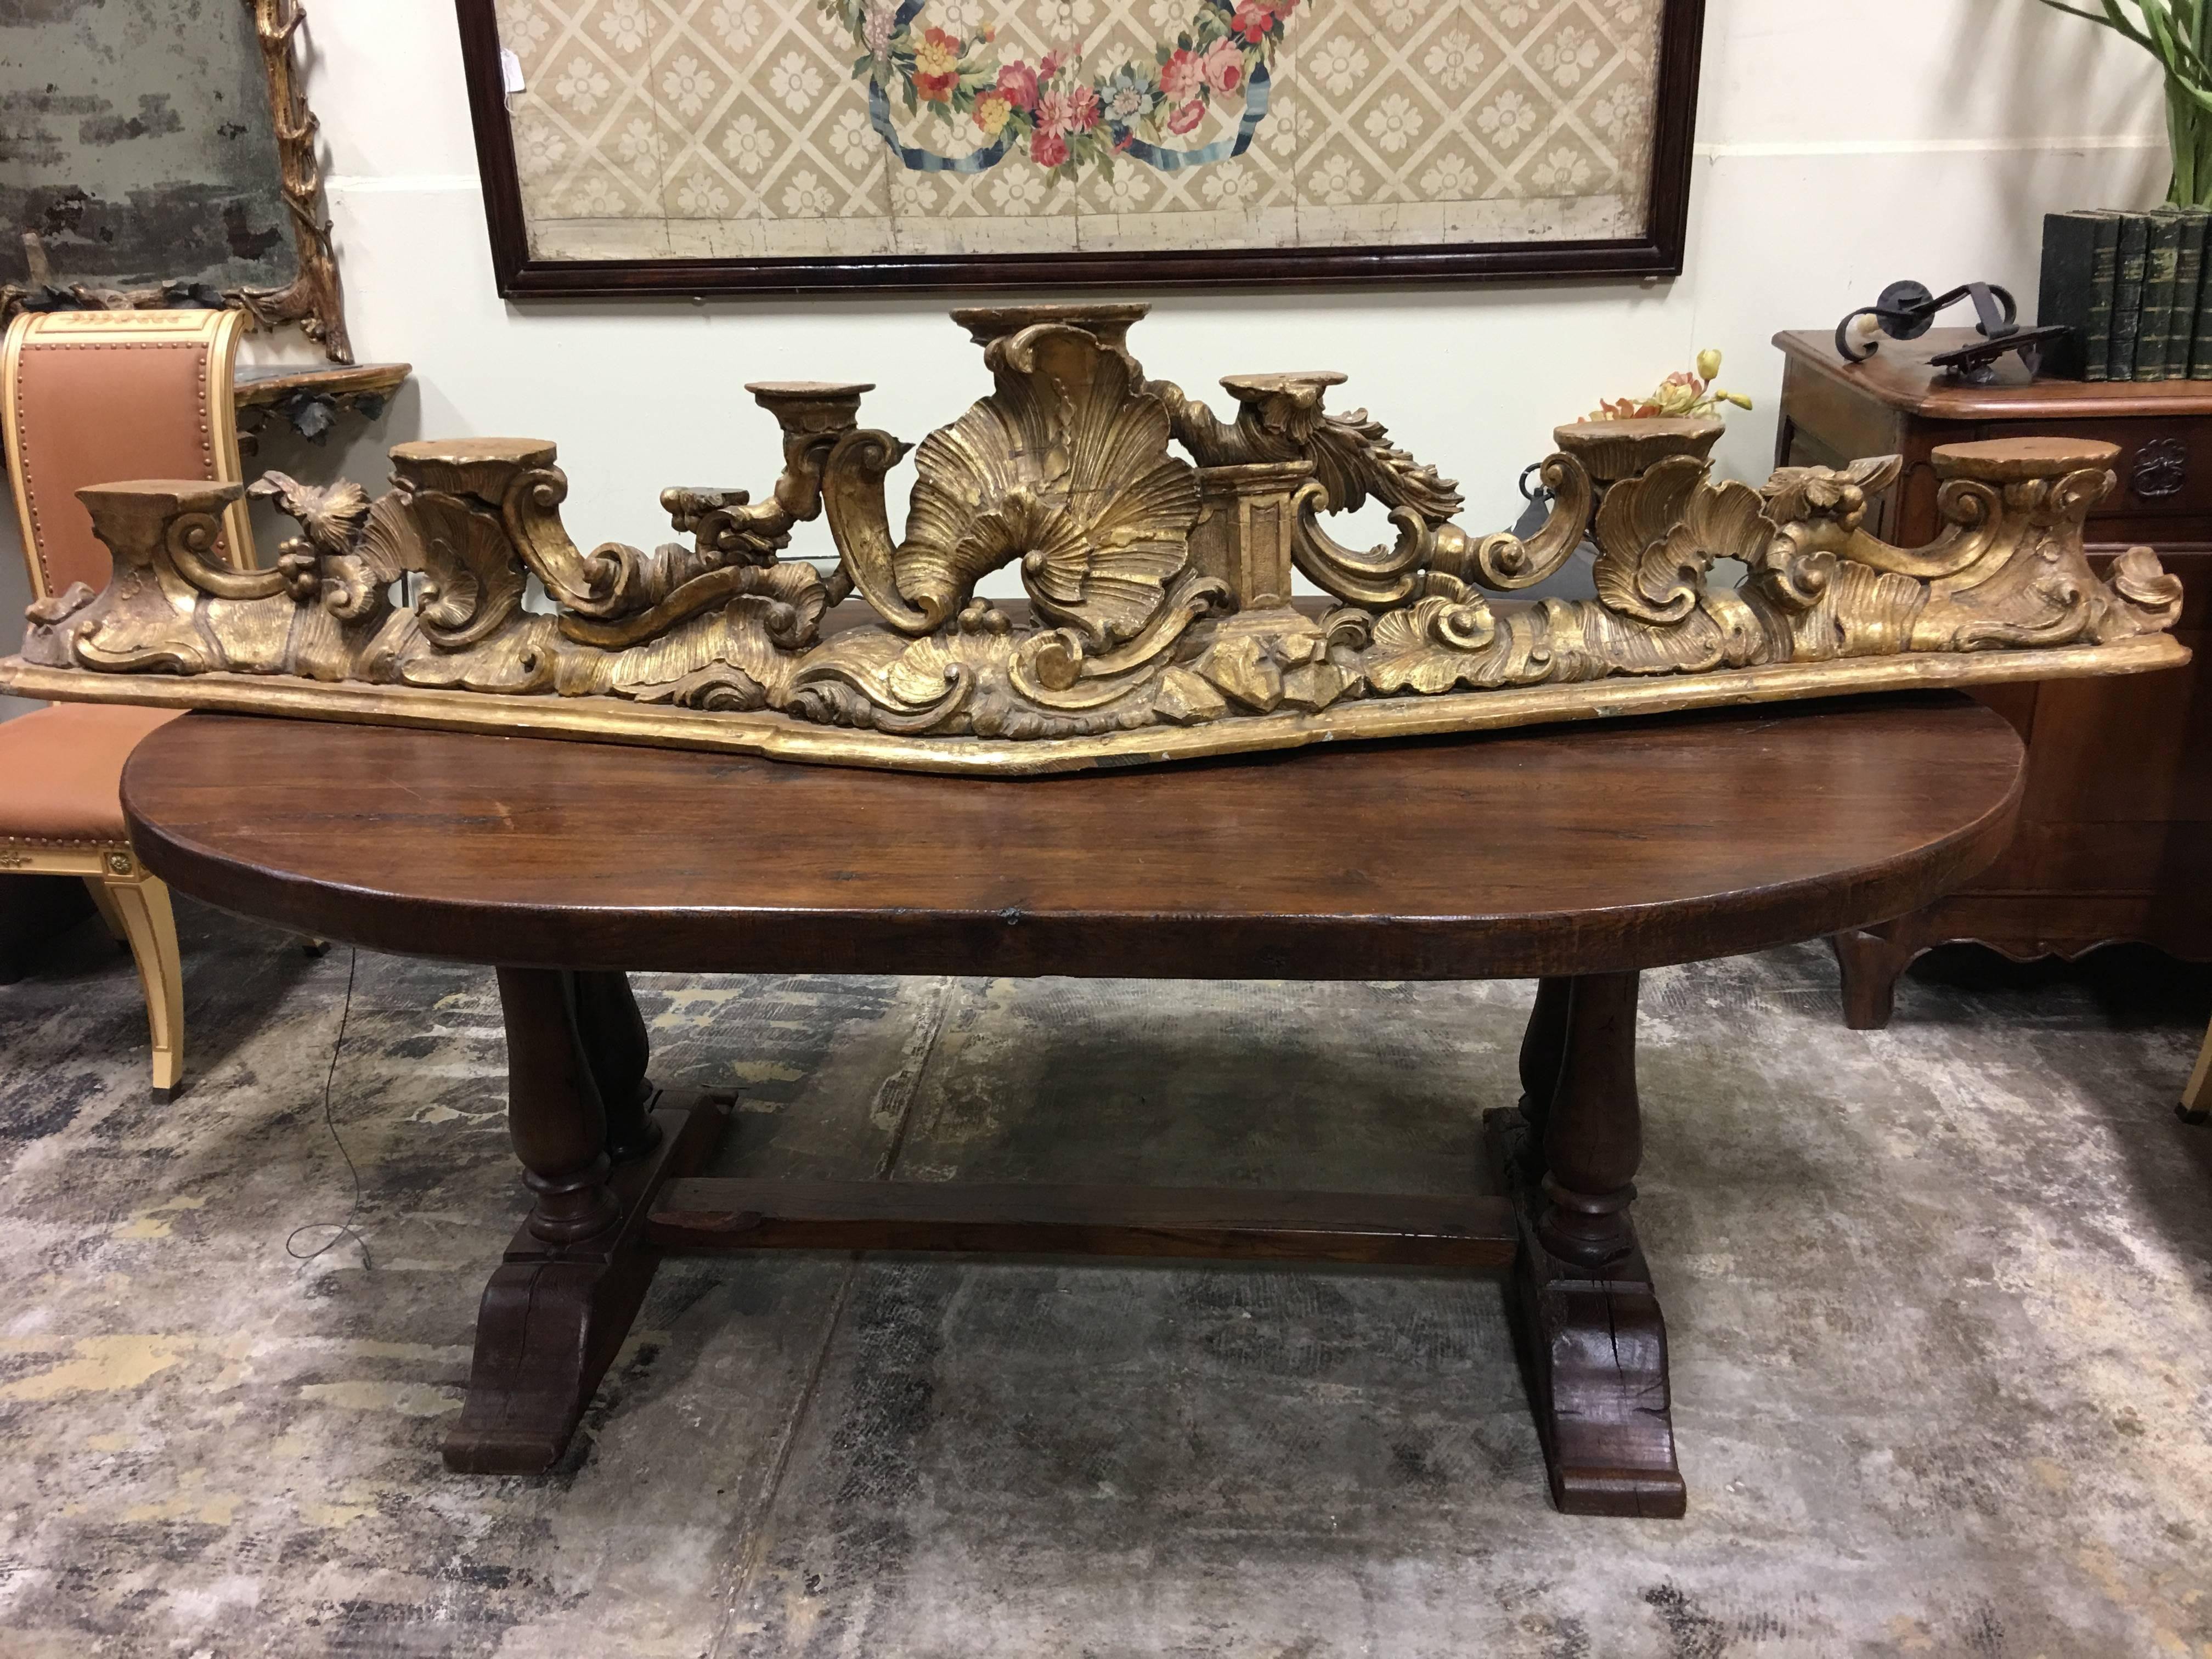 Early 18th century Italian candleholder from a Cathedral in Piedmont, Italy (main photo photographed upside down)
can be made into a console, or wall mount shelf etc.